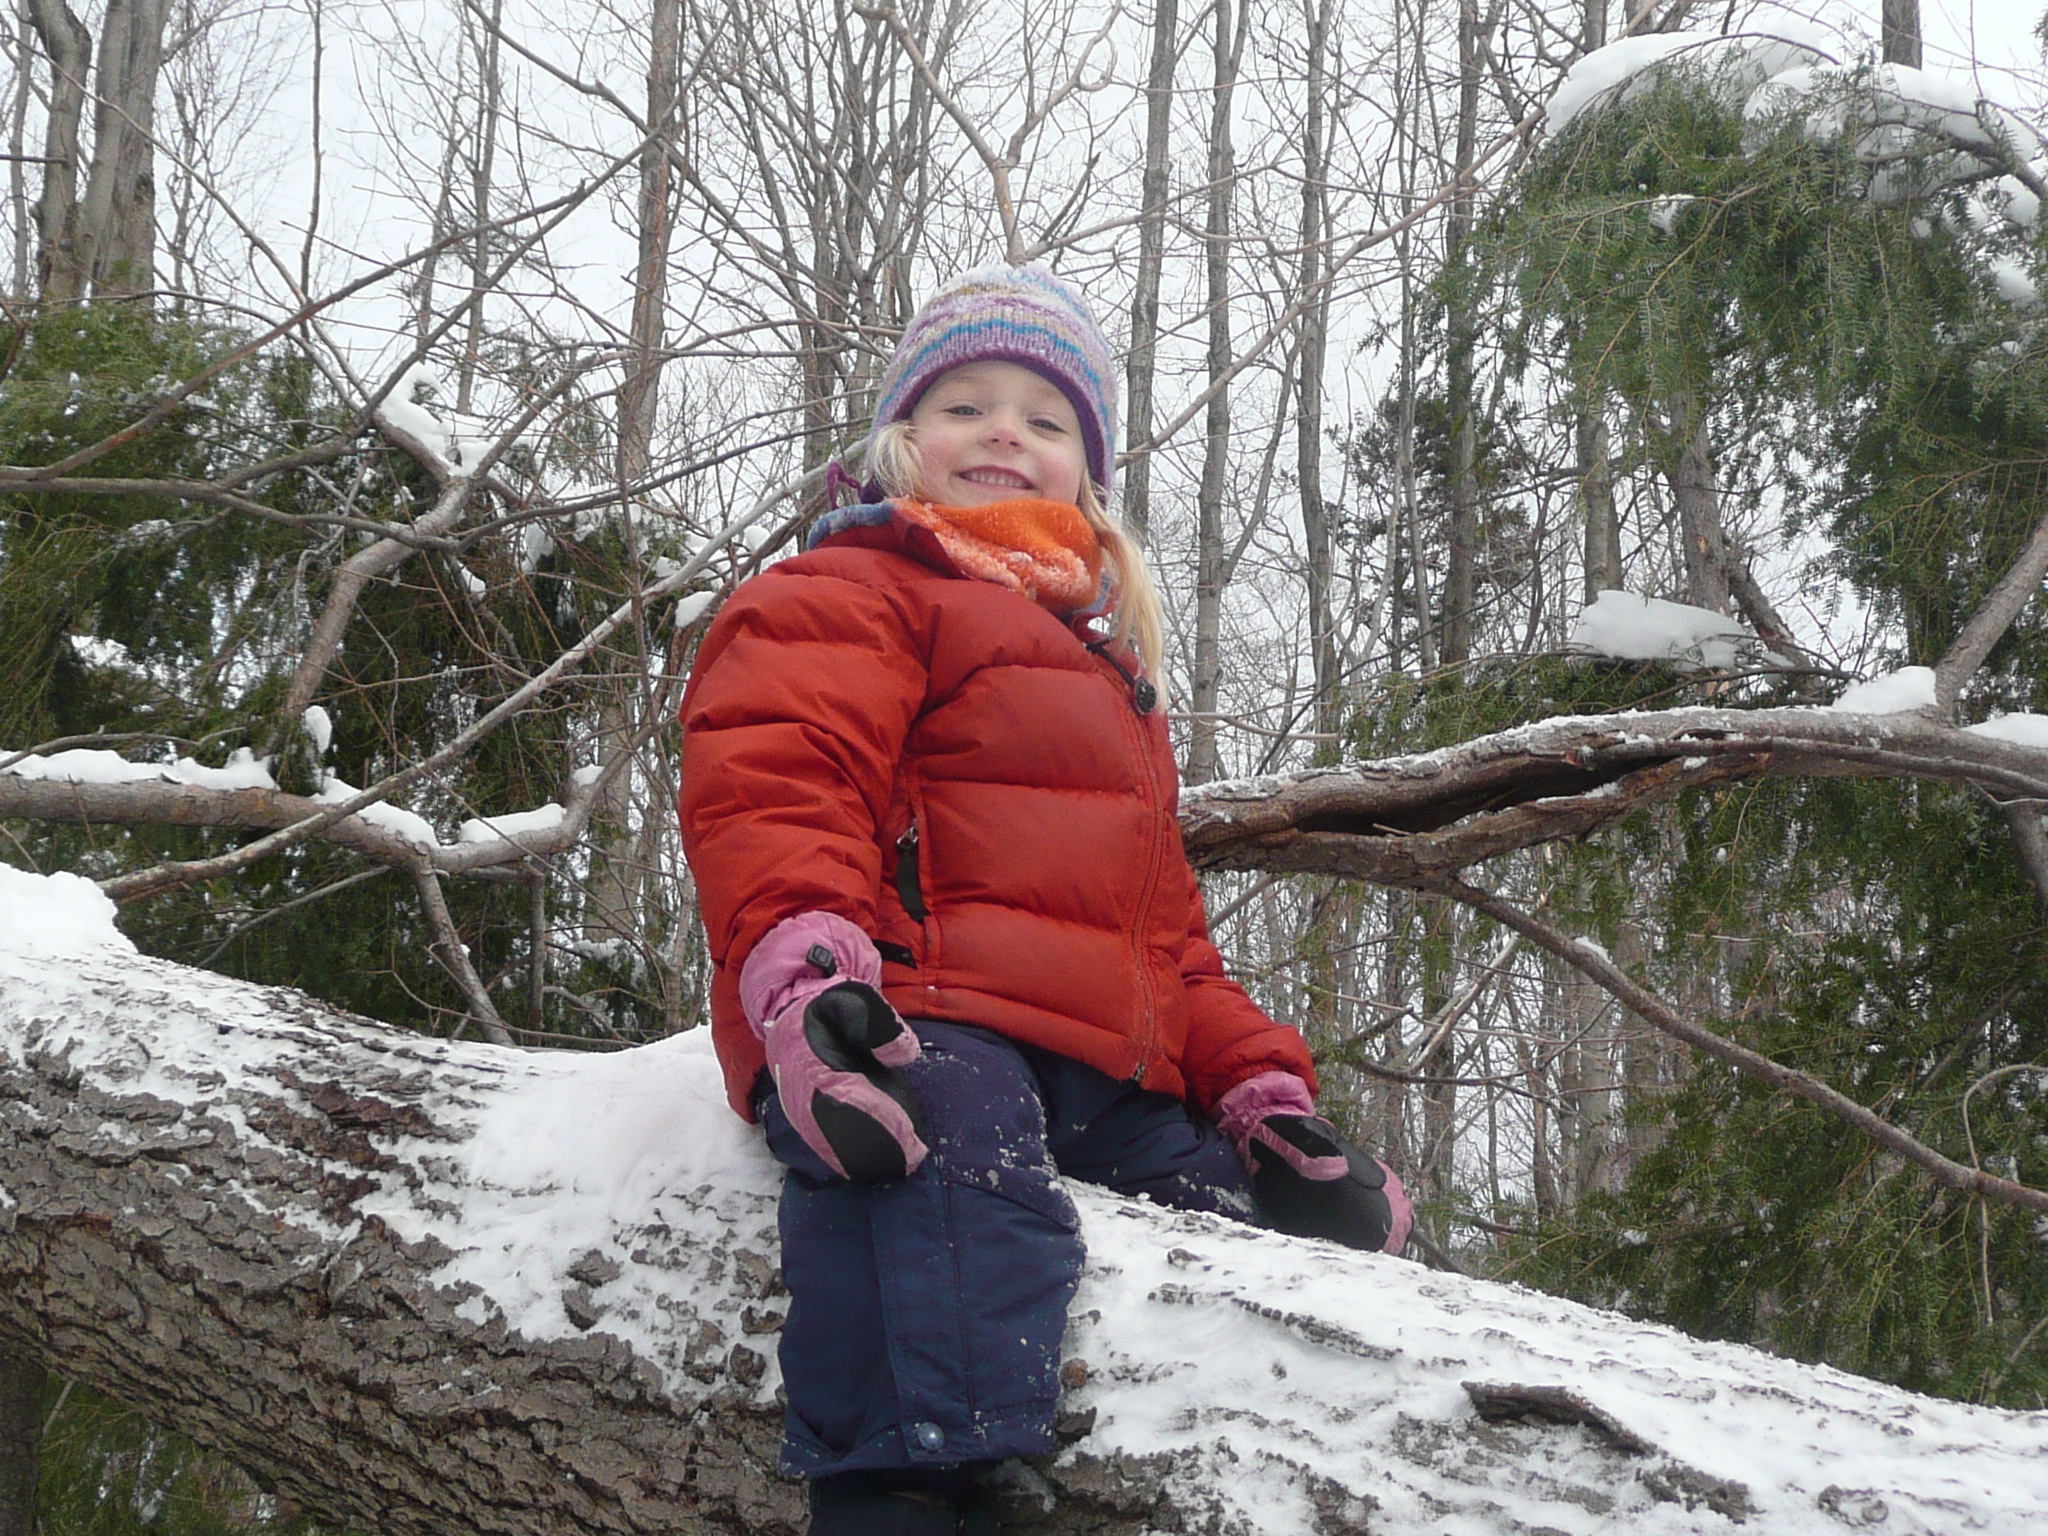 A young child in red puffy coat sit and smiles on a snow covered log